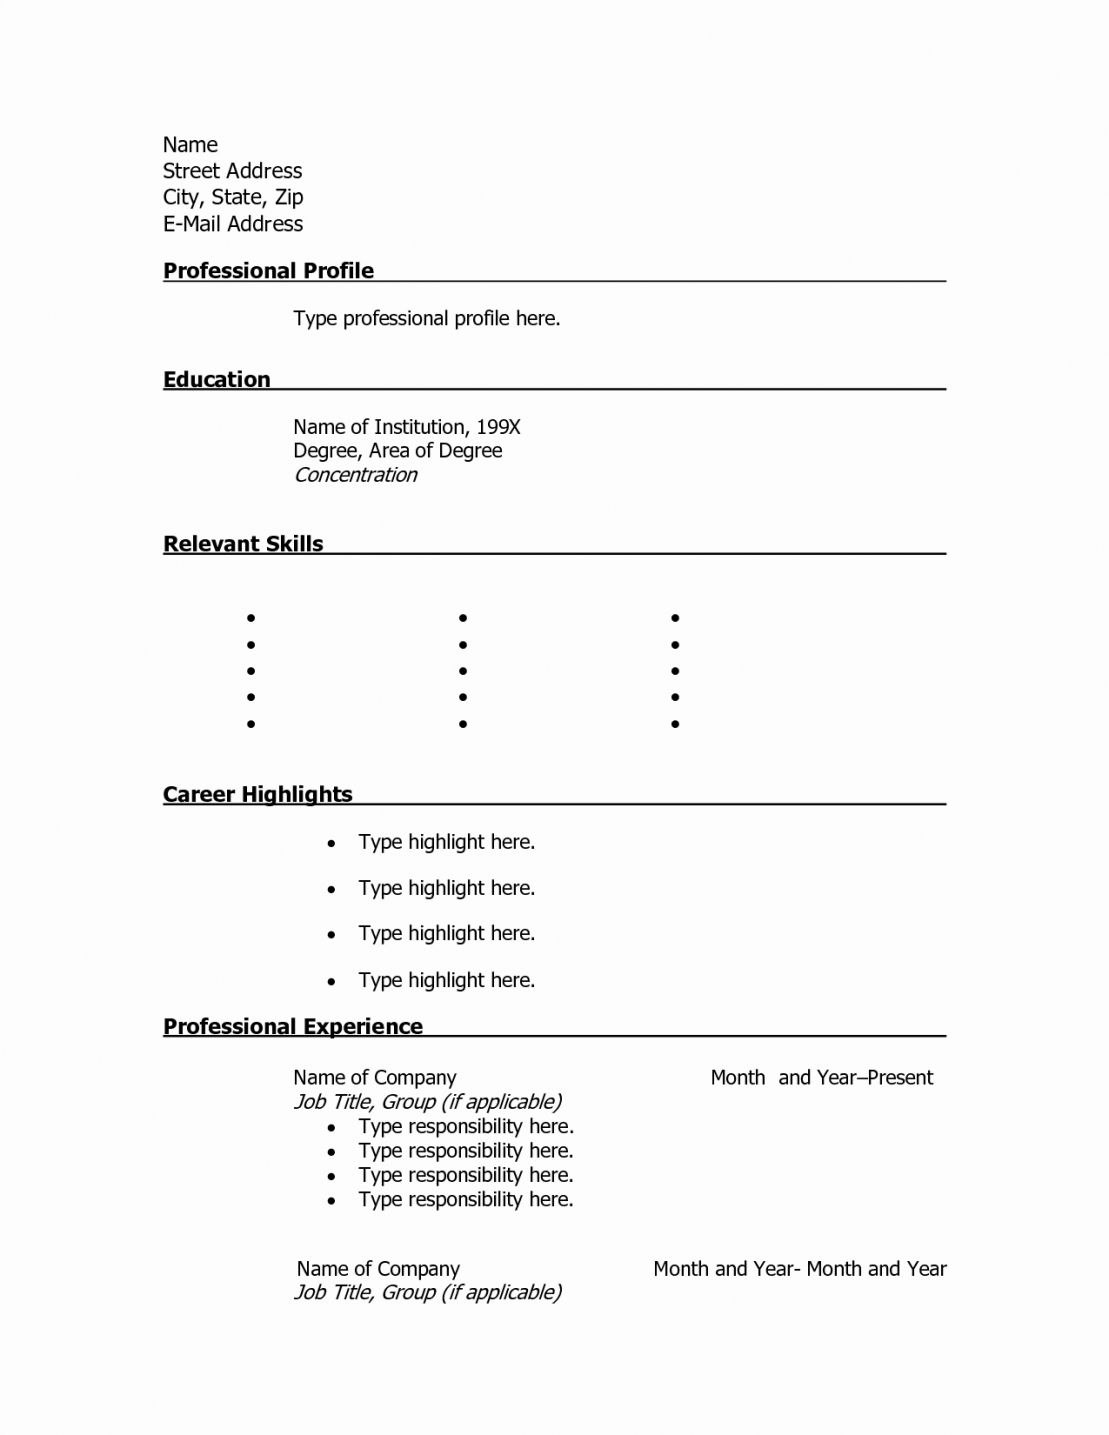 8 Blank Resume Templates For Microsoft Word Then Free Intended For Blank Resume Templates For Microsoft Word